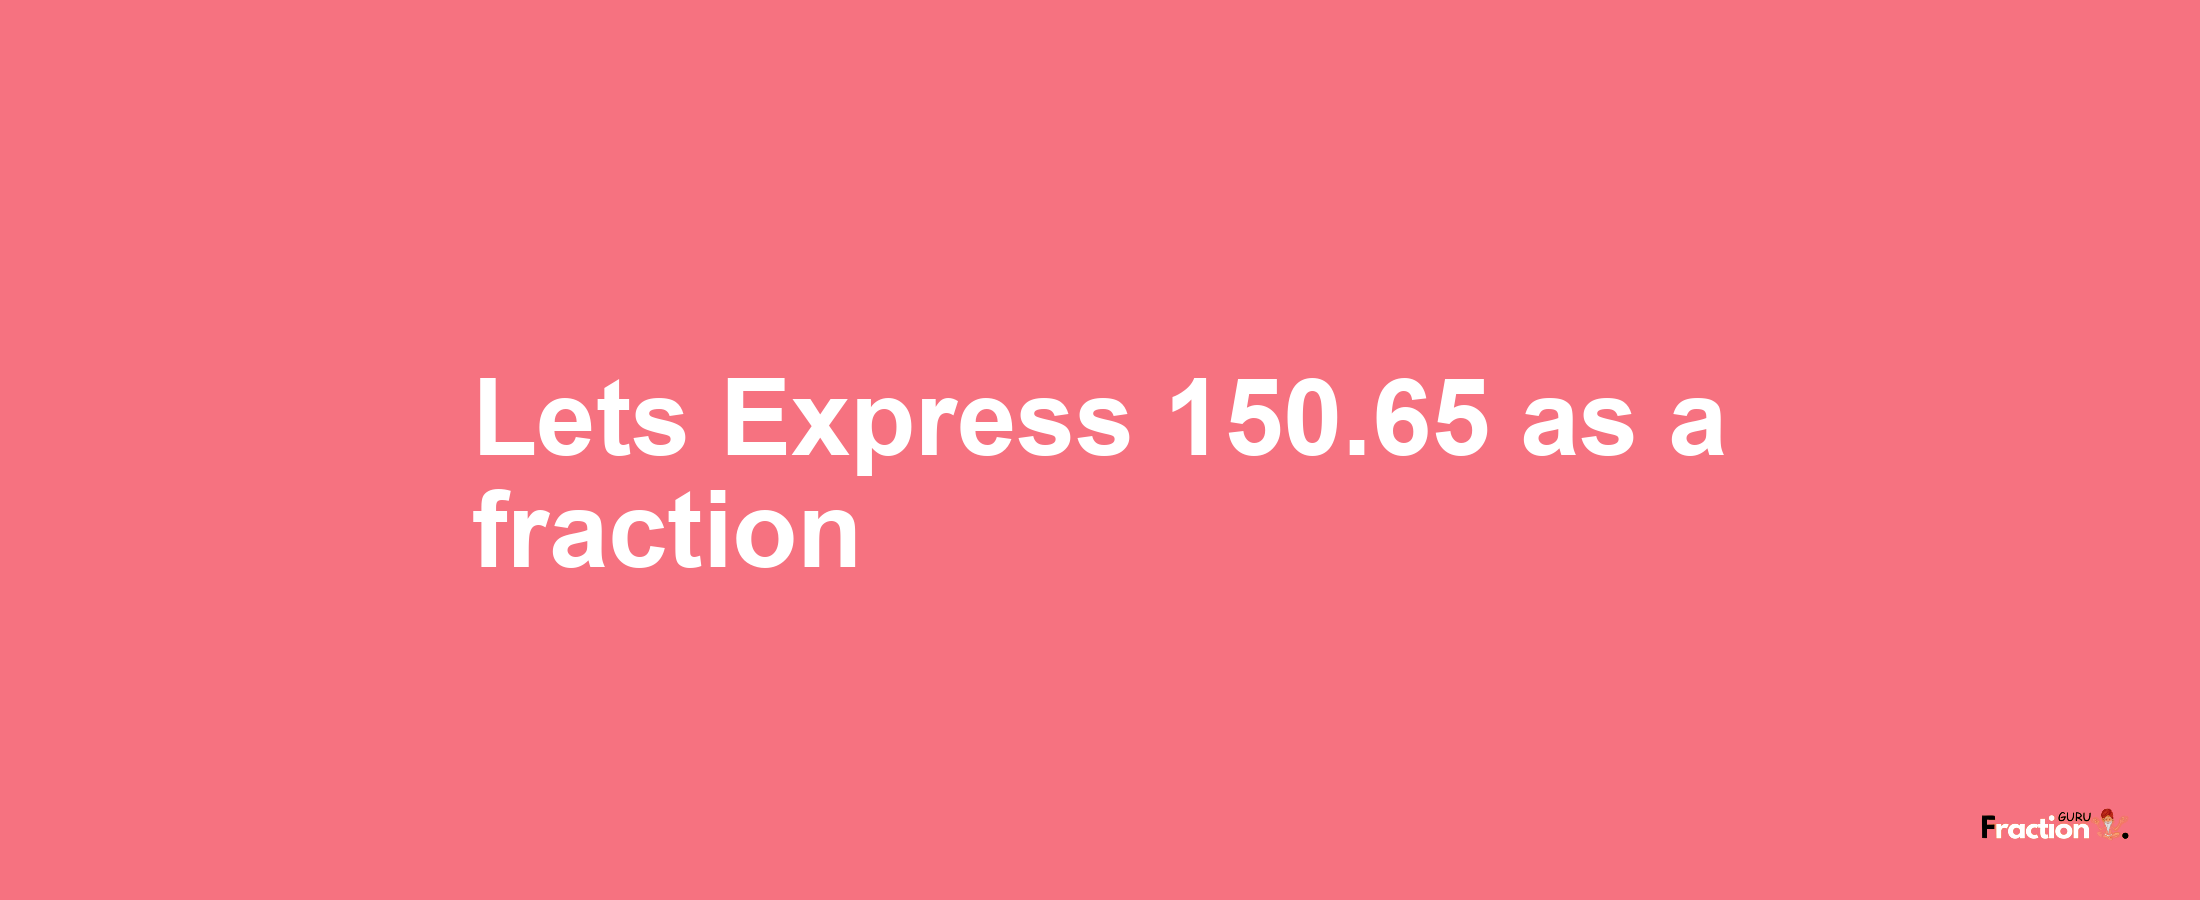 Lets Express 150.65 as afraction